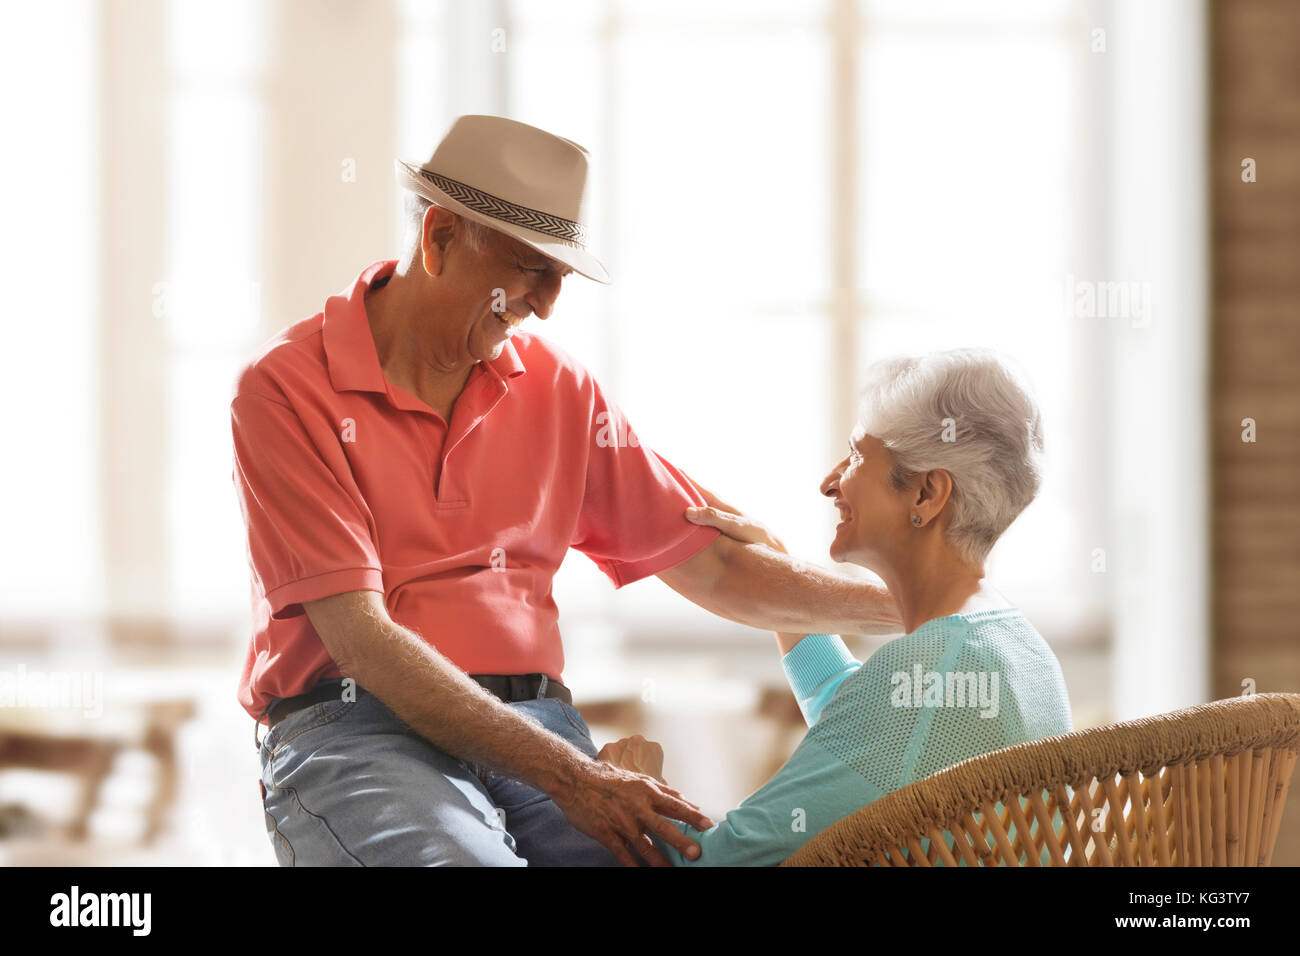 Smiling senior couple holding hands sitting together and talking Stock Photo